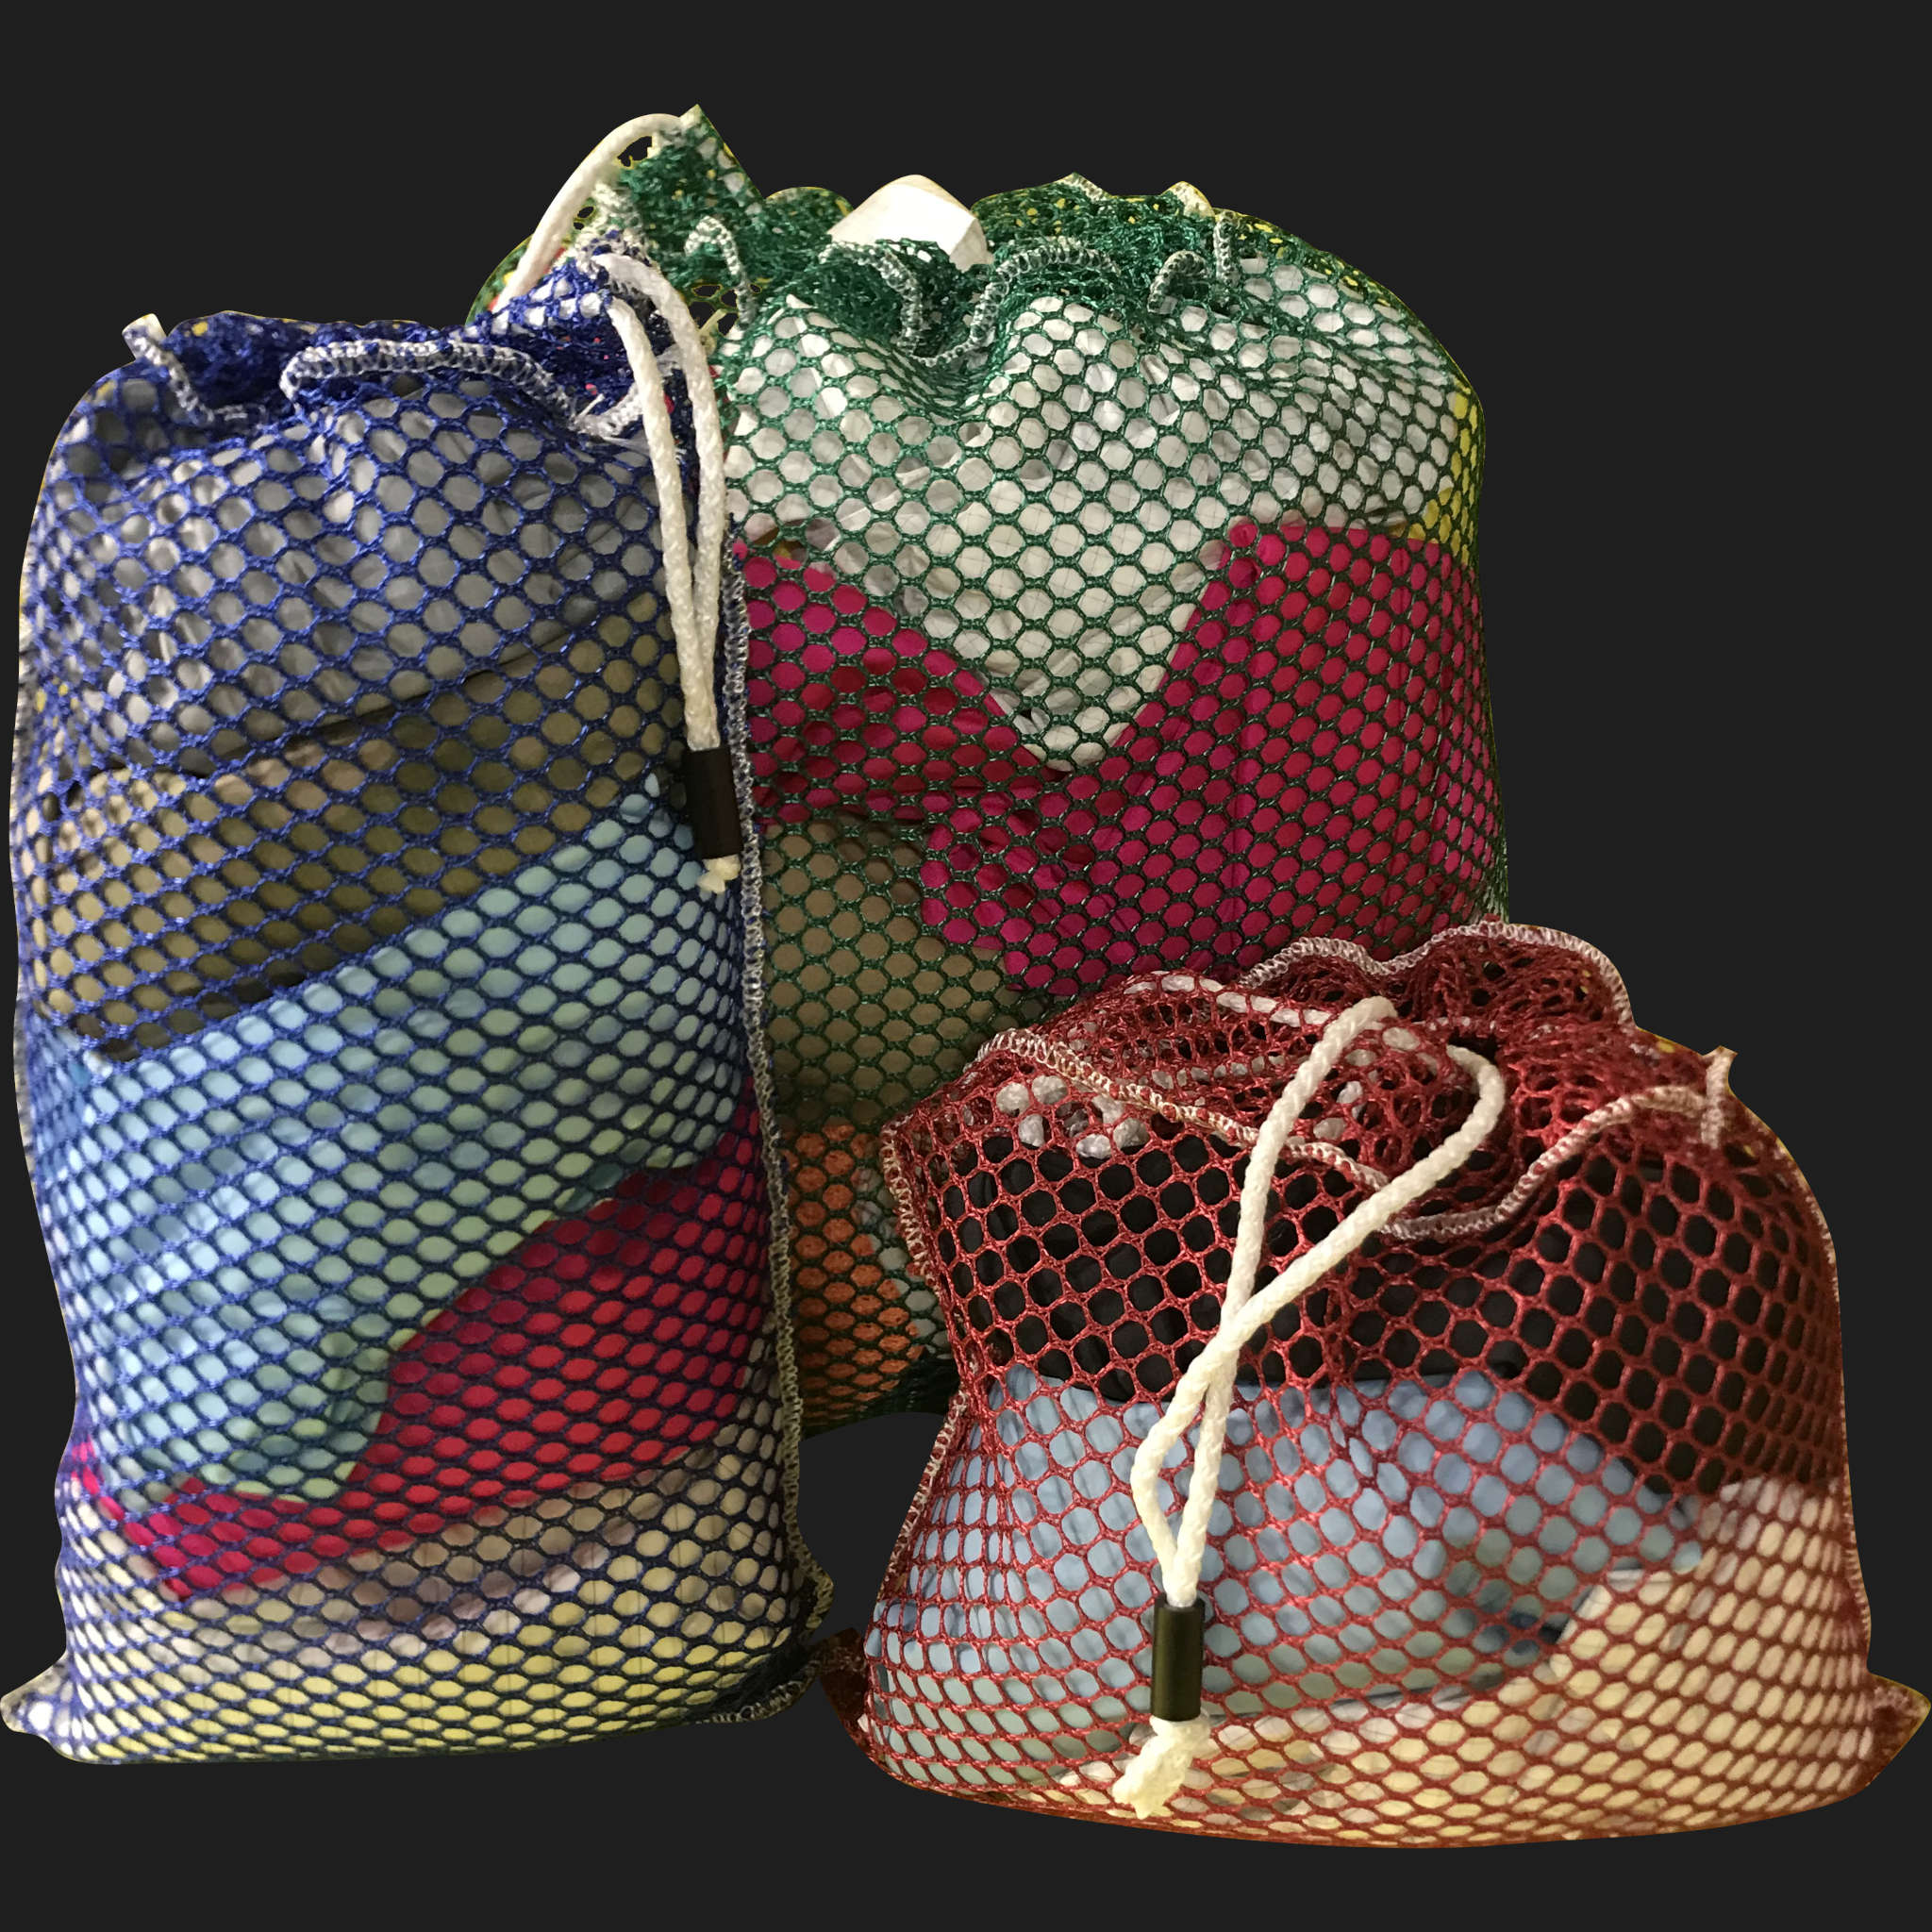 24" x 44" Customized Mesh-Net-Laundry Bags Heavy Duty with Cord and barrellock closure